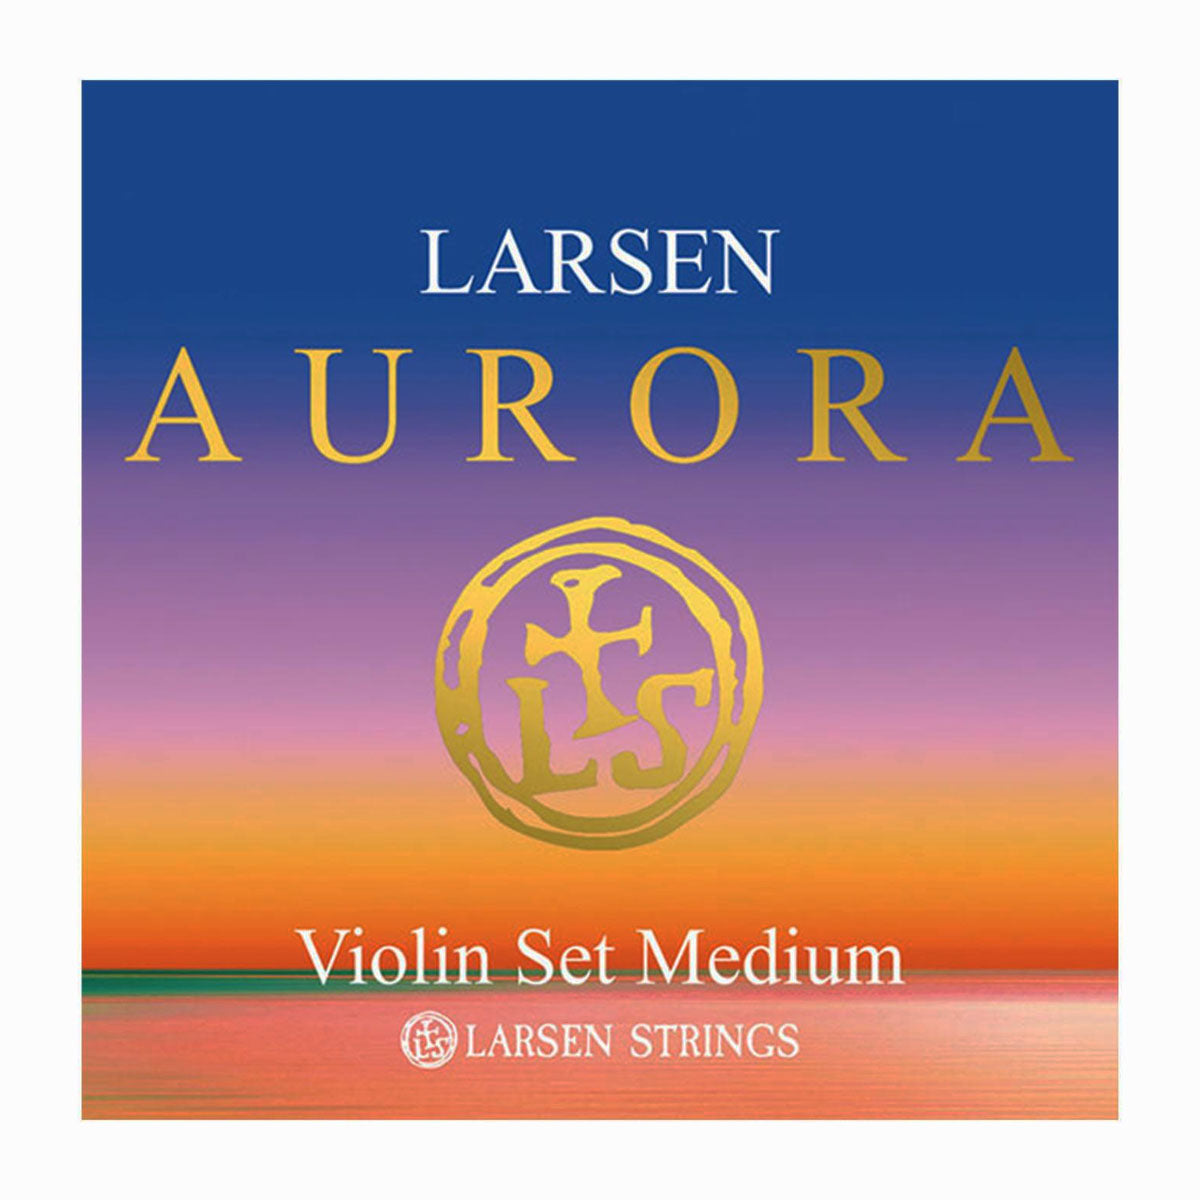 Aurora Violin Strings, Larsen, Denmark, full size, 4/4, 3/4, 1/2, 1/4, 1/8, 1/16, hand-picked and inspected by Violins and such, with TEO musical Instruments, London Ontario Canada